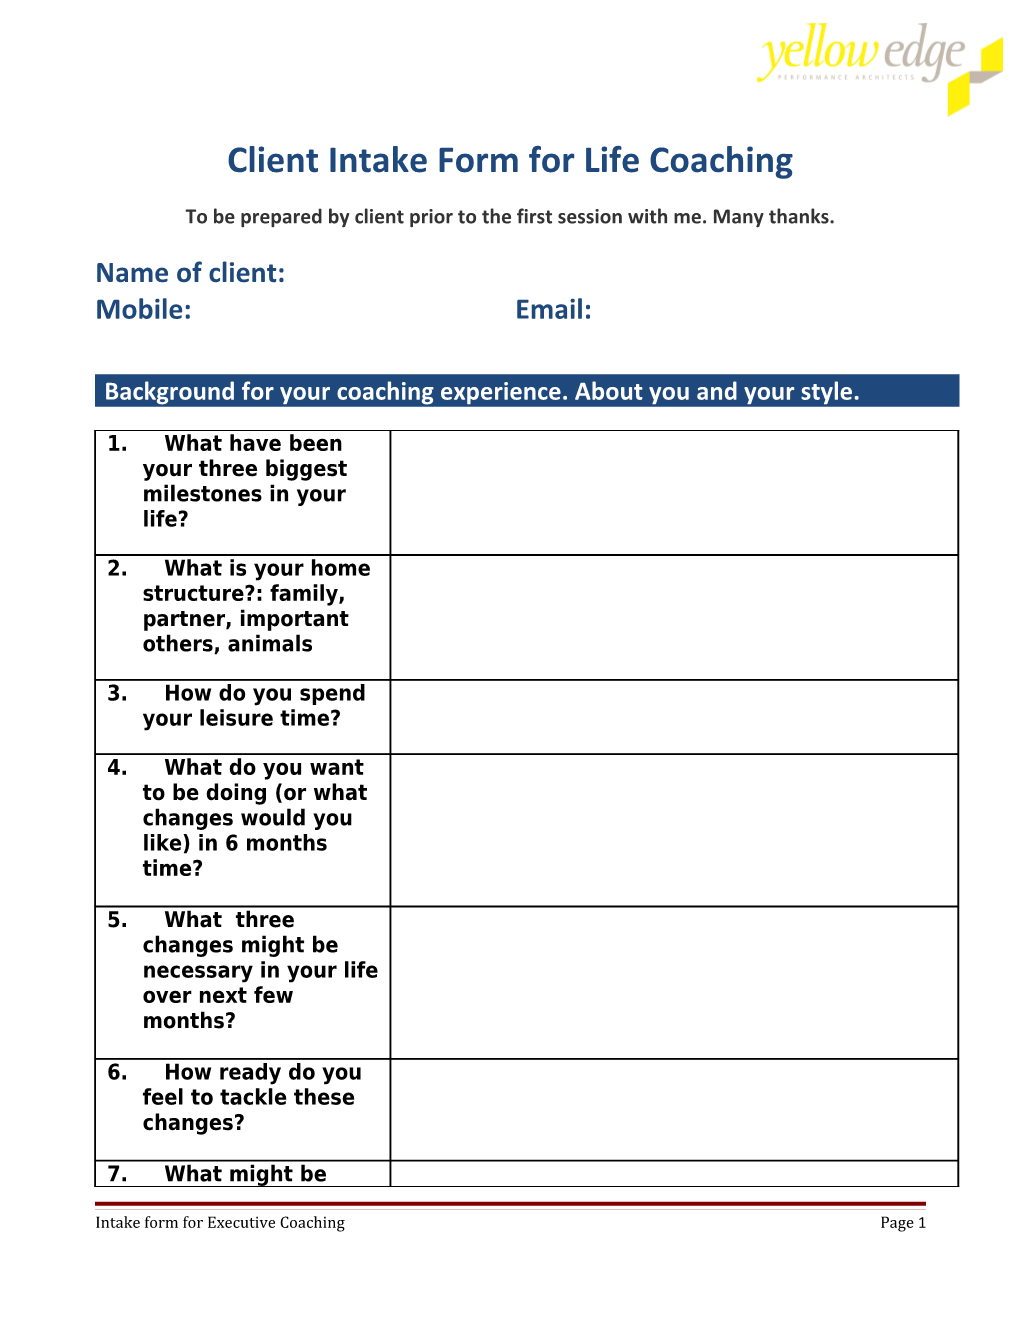 Client Intake Form for Life Coaching